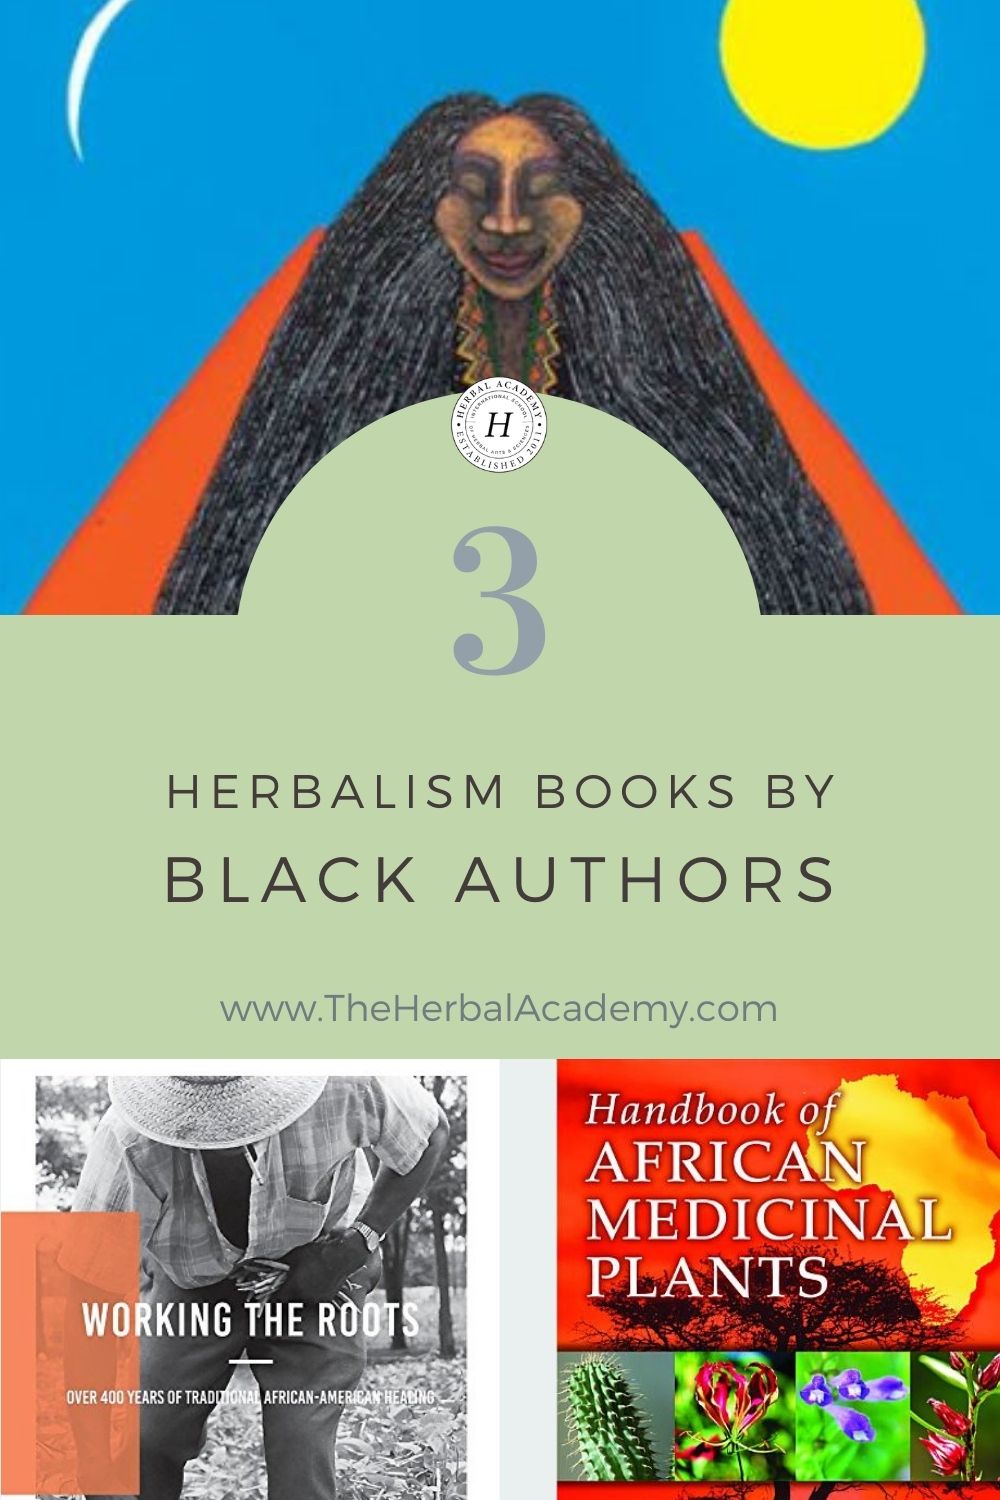 As a Black Herbalist, These are my 3 Favorite Herbalism Books | Herbal Academy | Herbalist and blogger Kendra Payne shares and summarizes her three favorite herbalism books written by black authors.